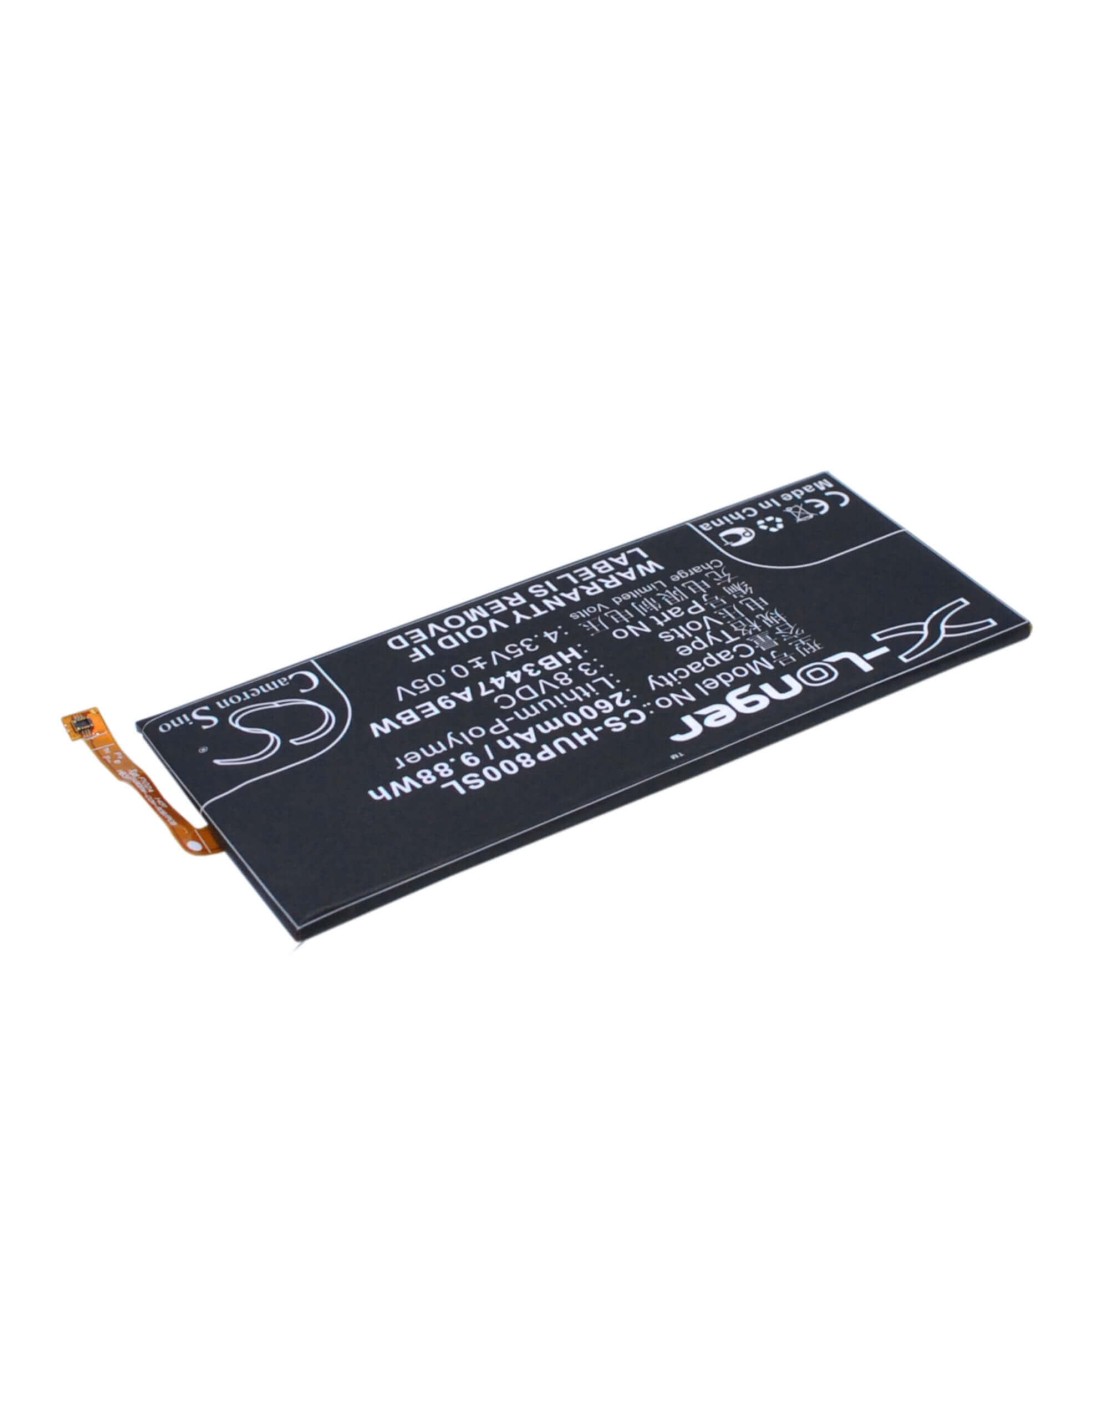 Battery for Huawei Ascend P8, P8, GRA-L09 3.8V, 2600mAh - 9.88Wh